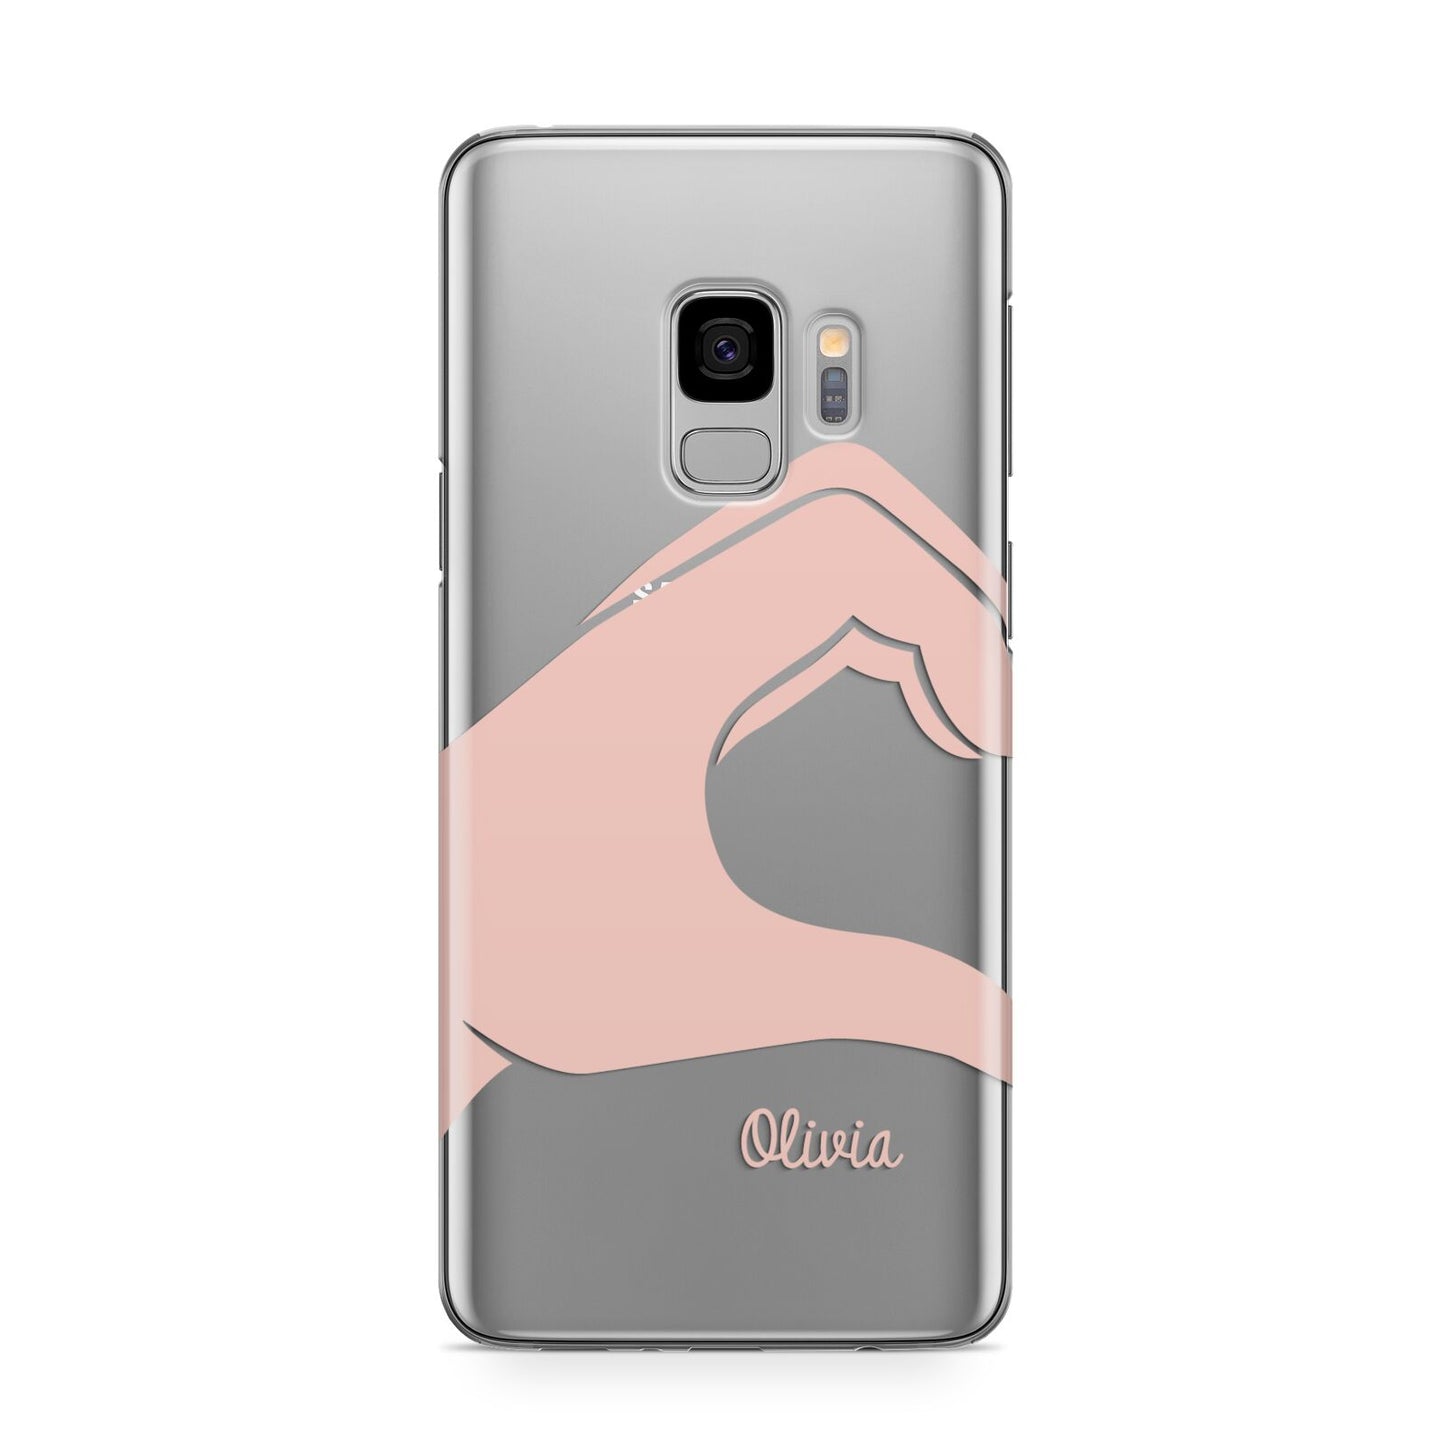 Left Hand in Half Heart with Name Samsung Galaxy S9 Case